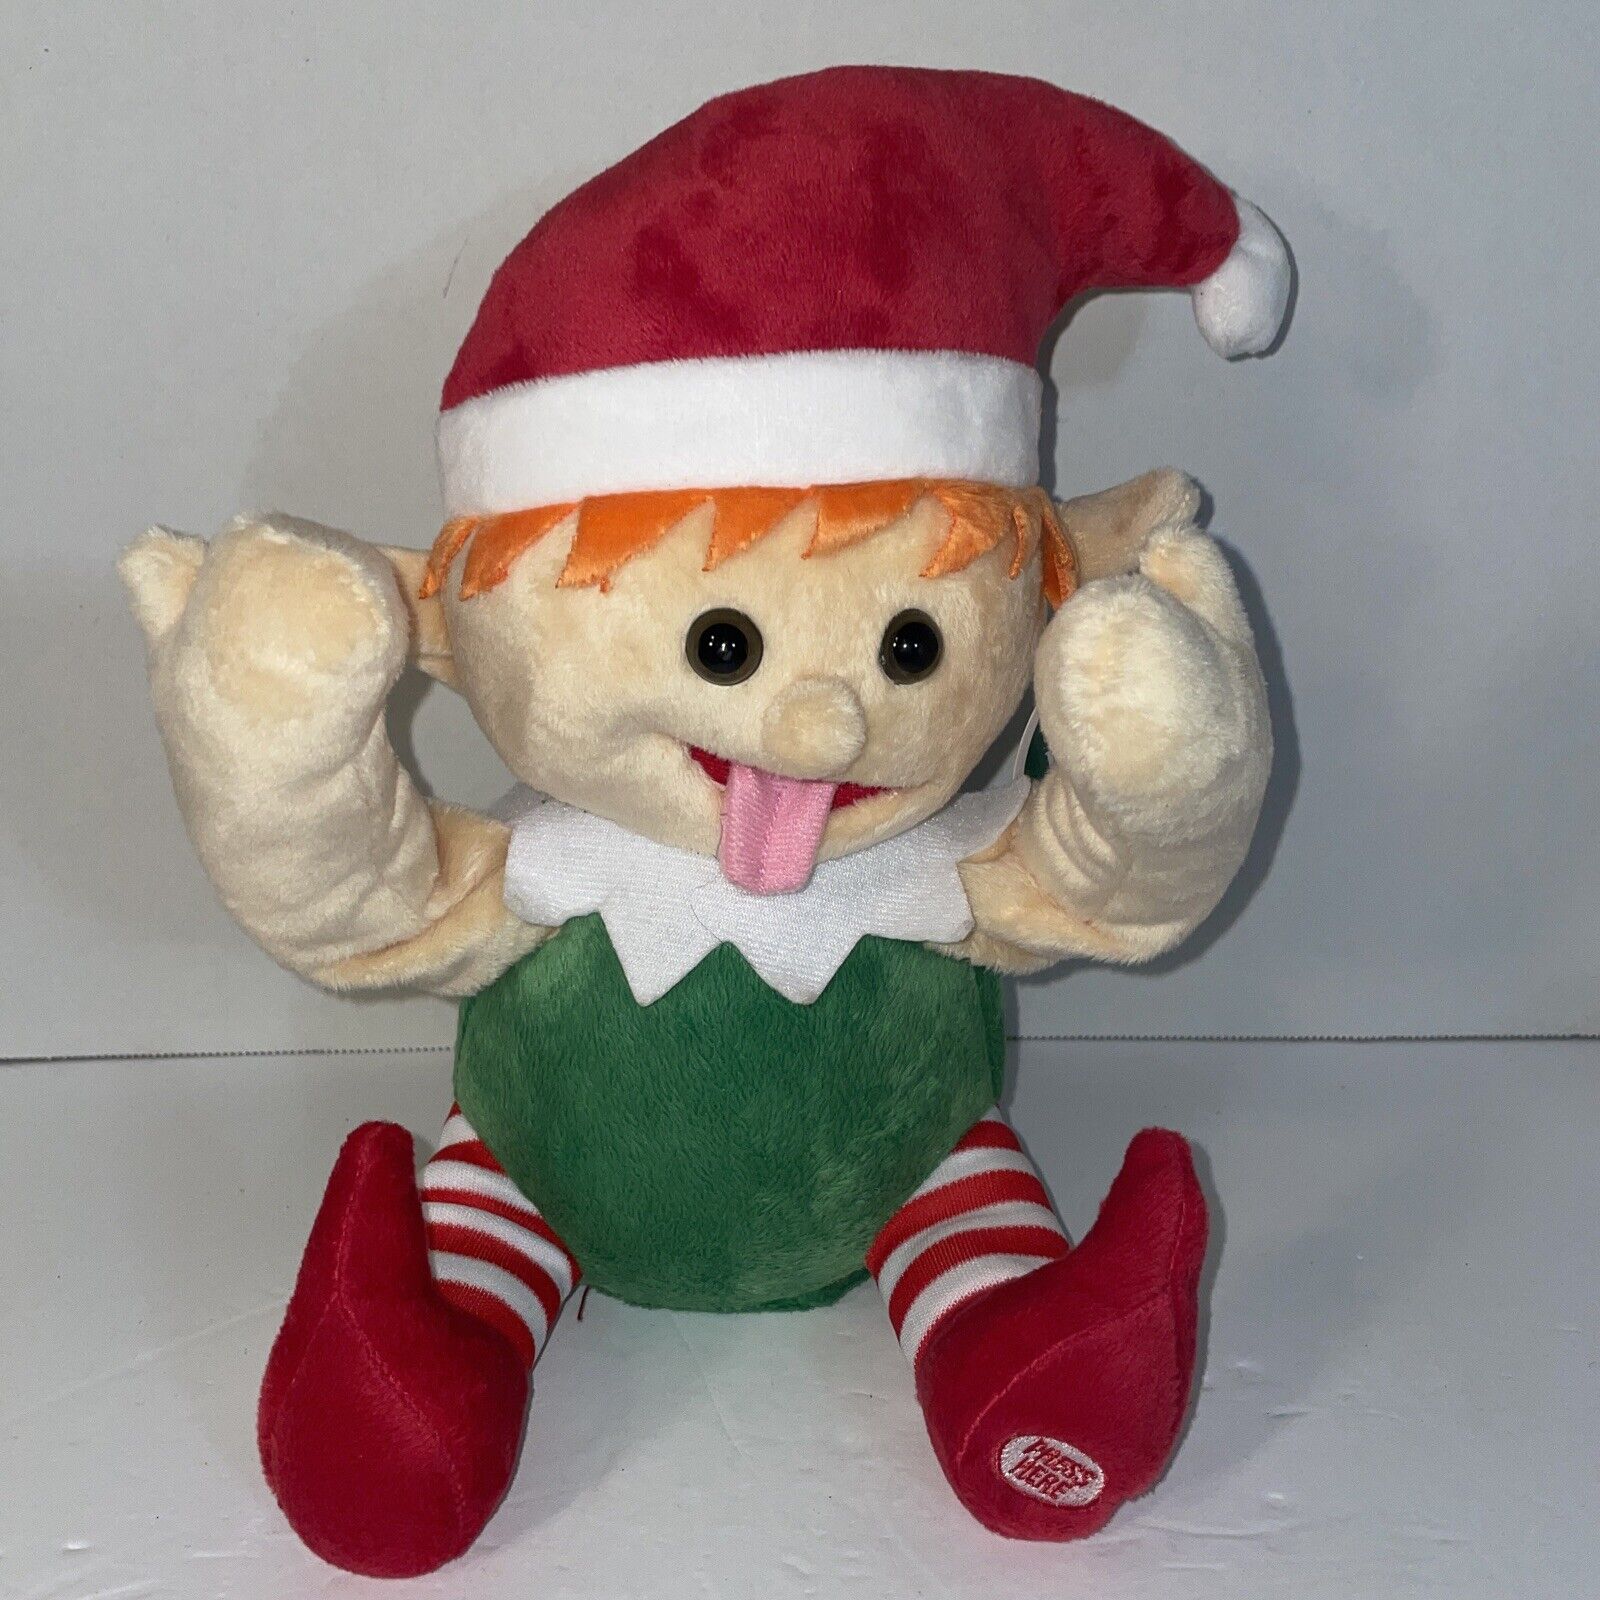 Winter Wonder Lane Funny Face Elf Sticks out Tongue Animated Plush Plays Music